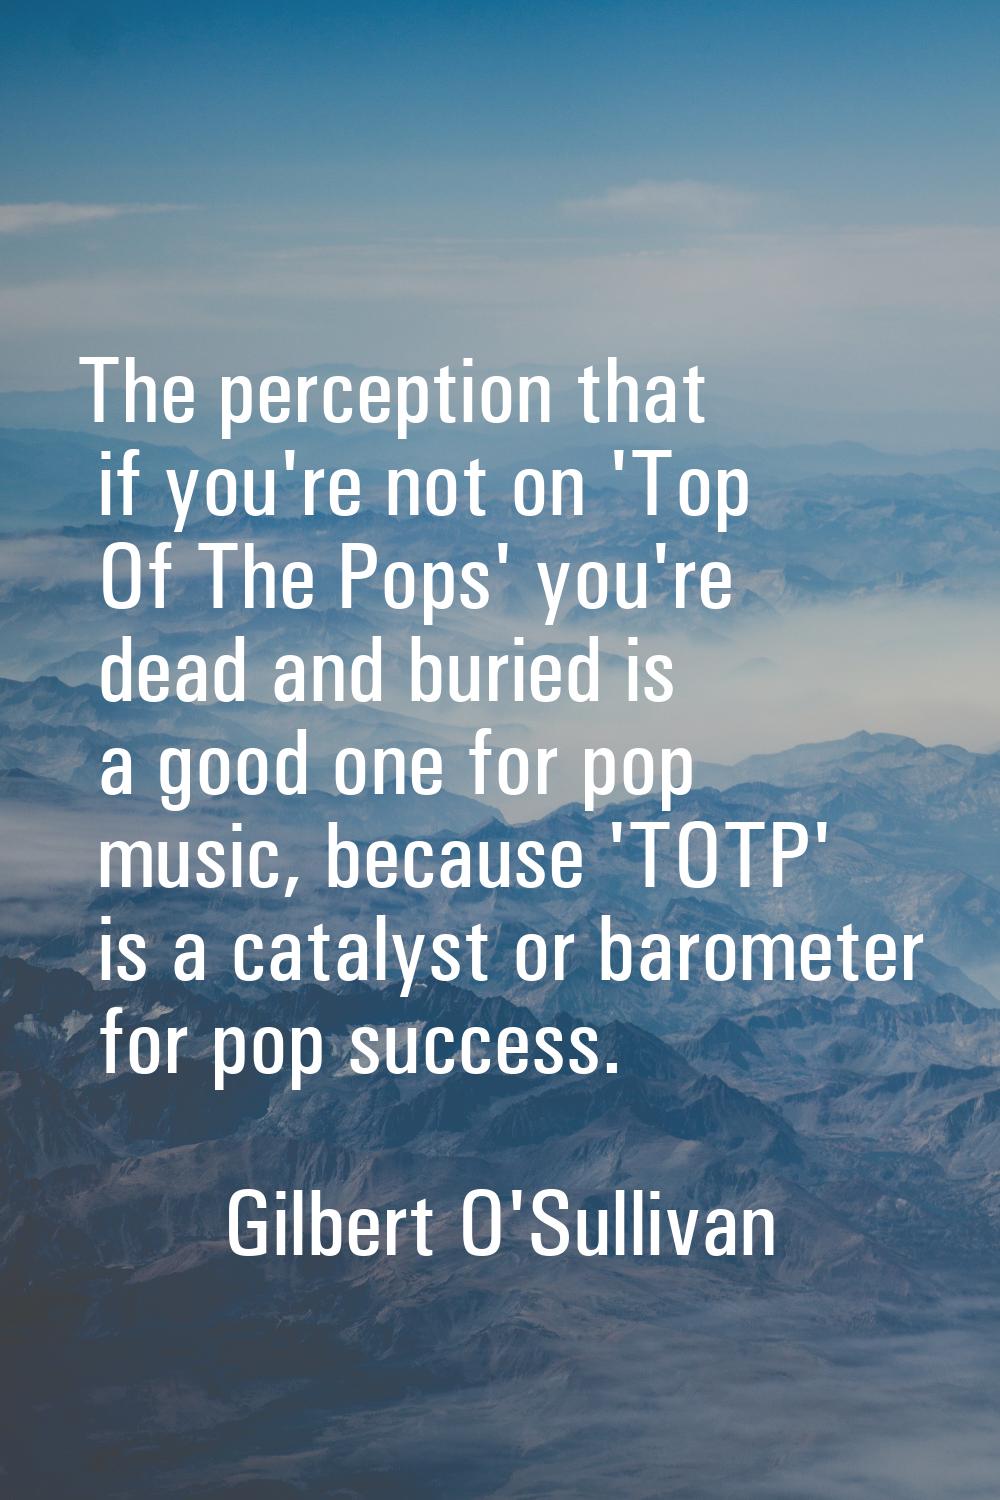 The perception that if you're not on 'Top Of The Pops' you're dead and buried is a good one for pop